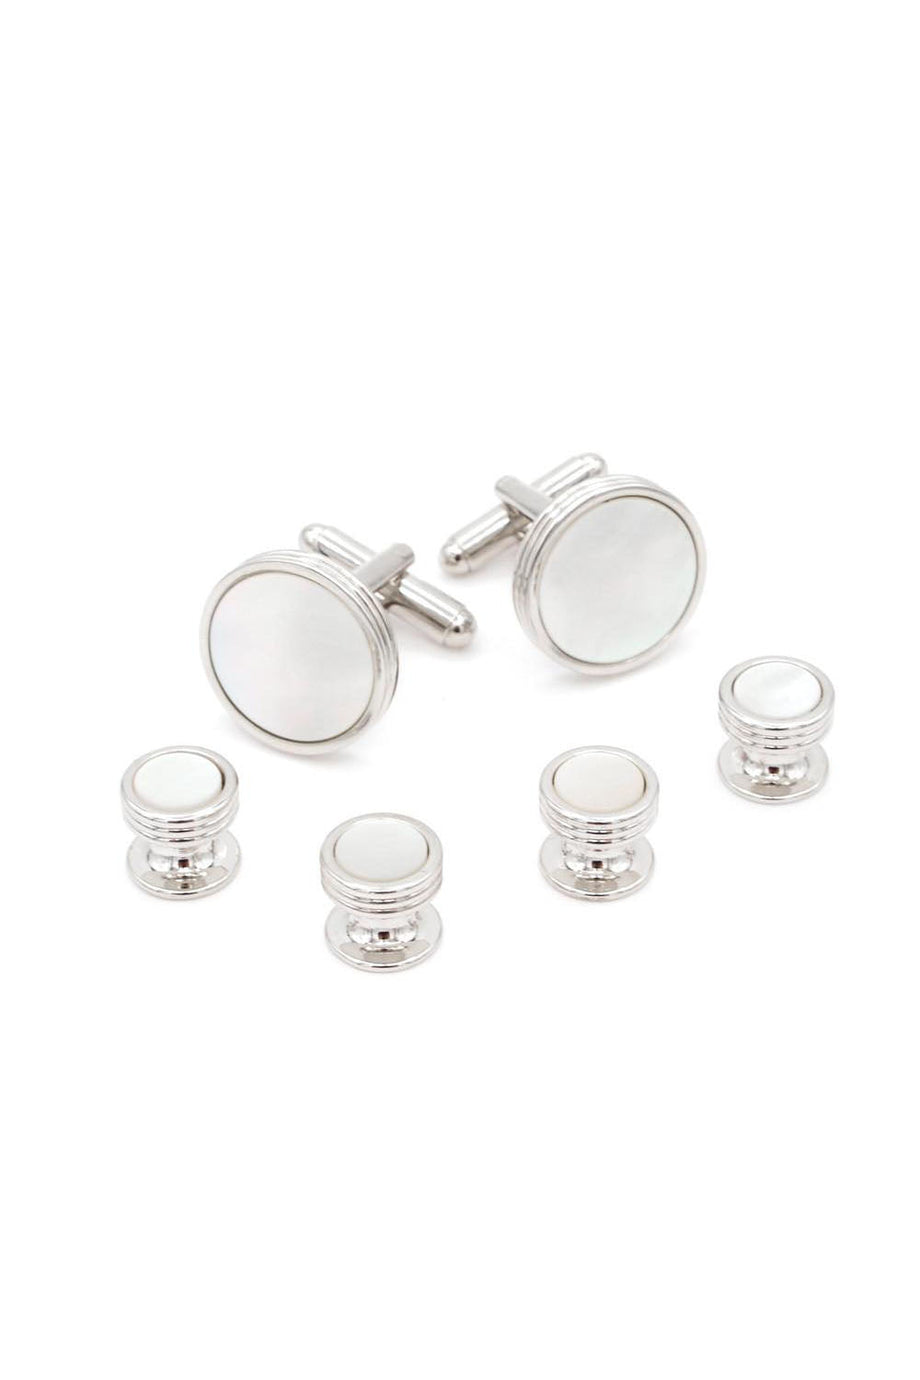 JJ Weston Triple Edge Mother of Pearl Silver Studs and Cufflinks Set